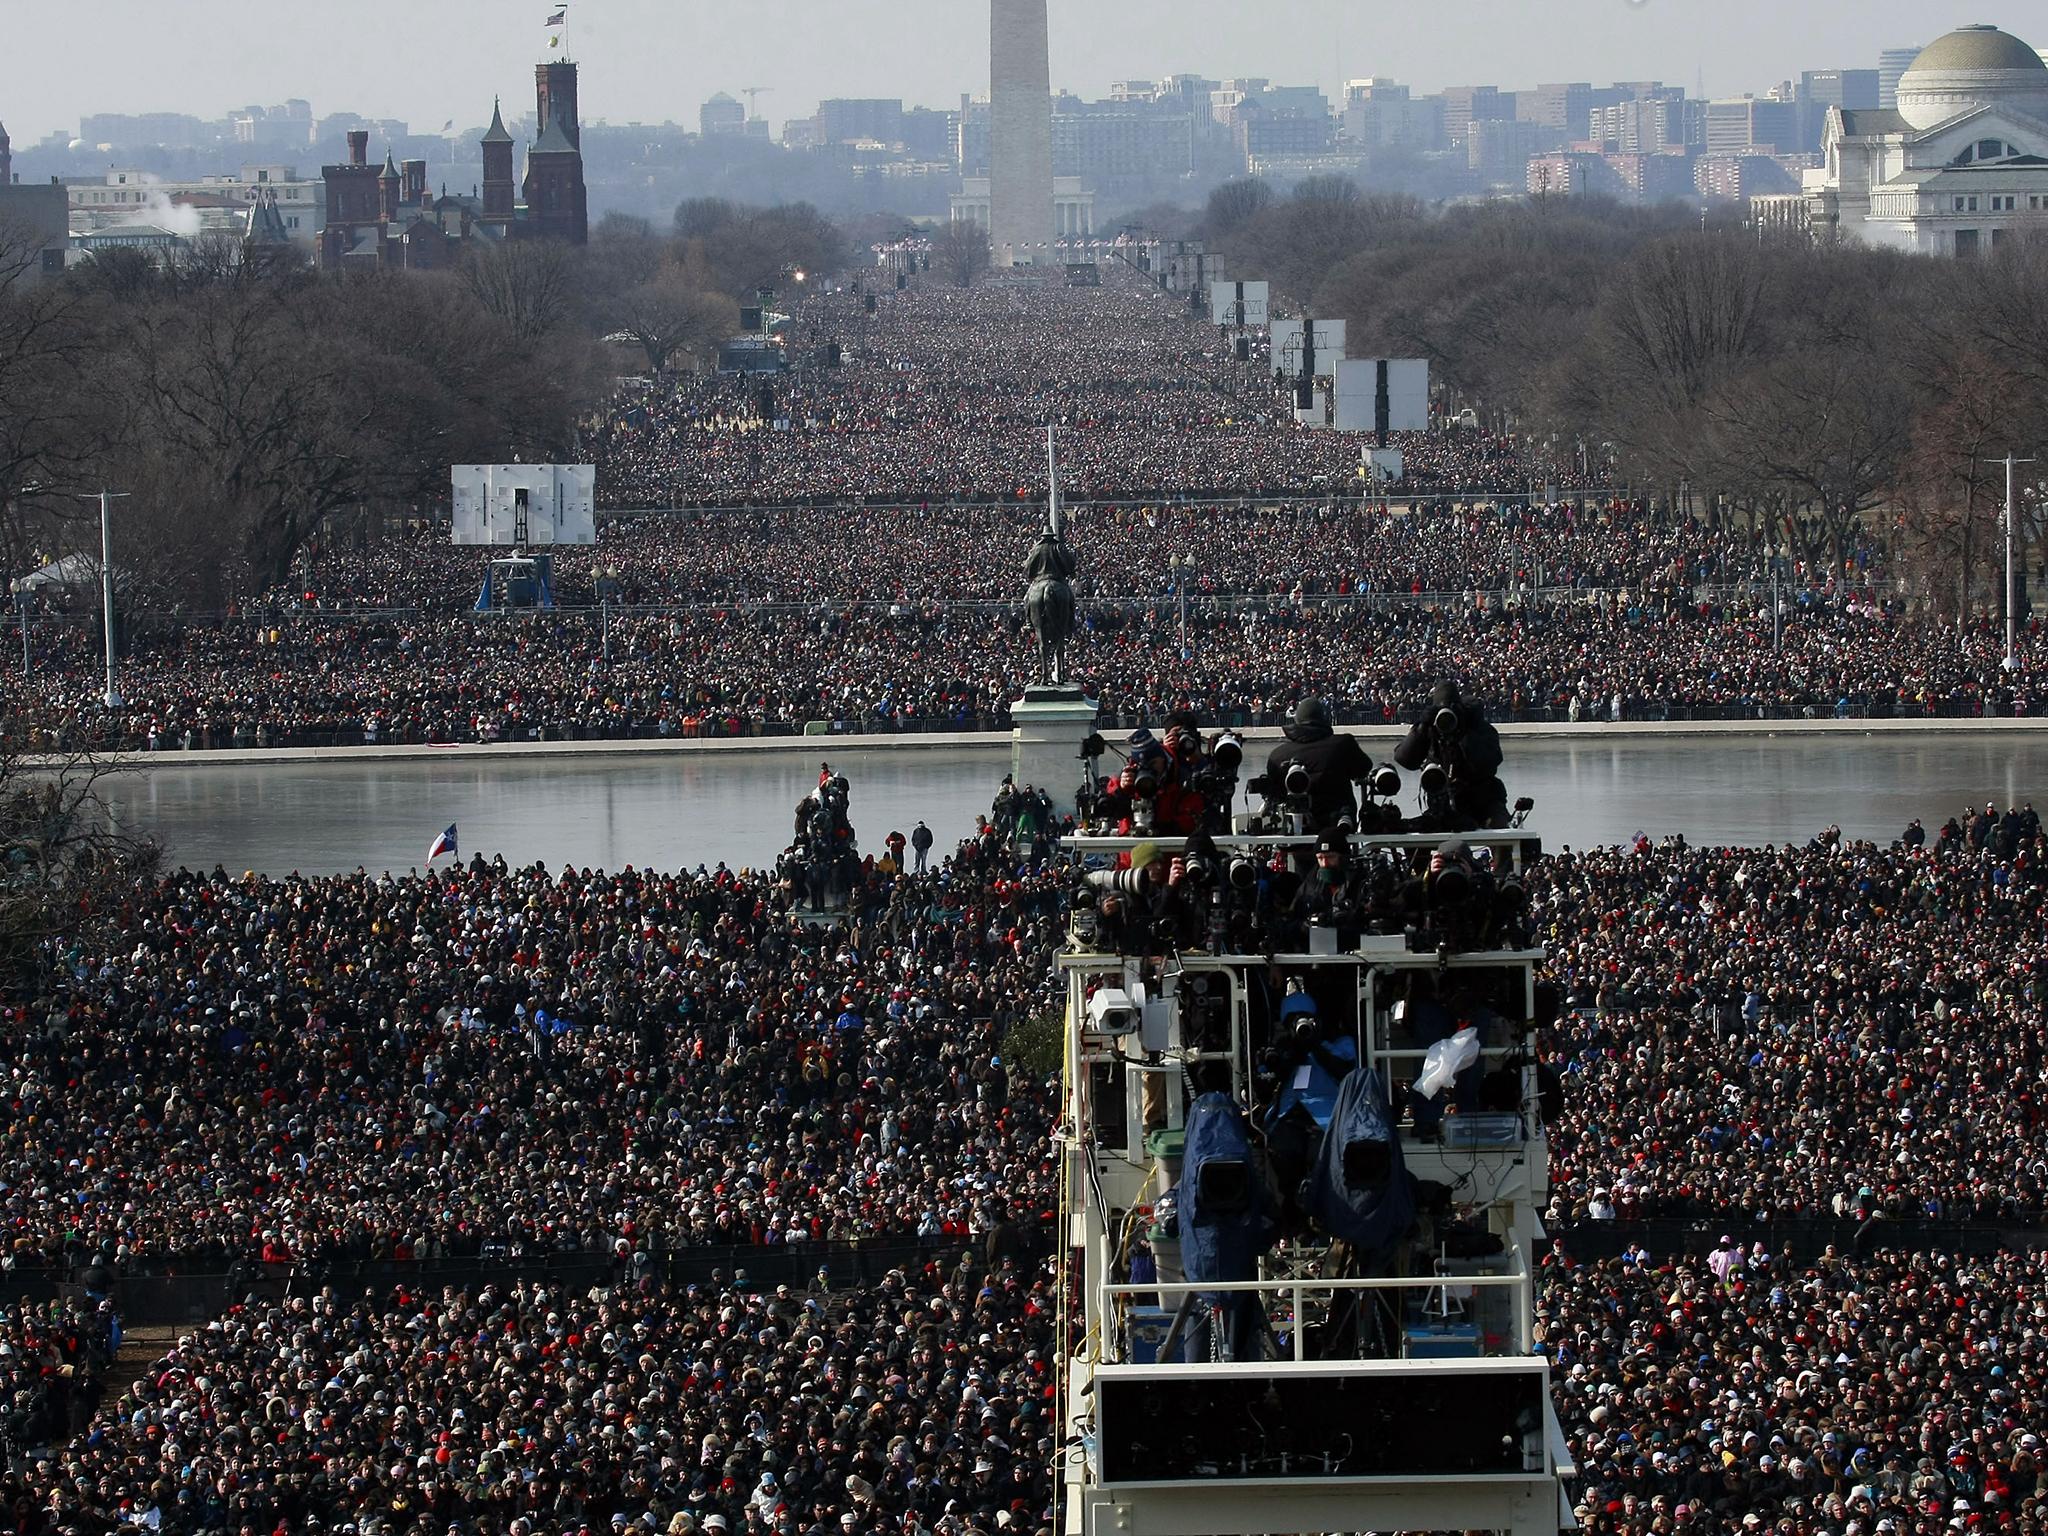 Barack Obama's inauguration as the 44th US President in 2009 in Washington DC